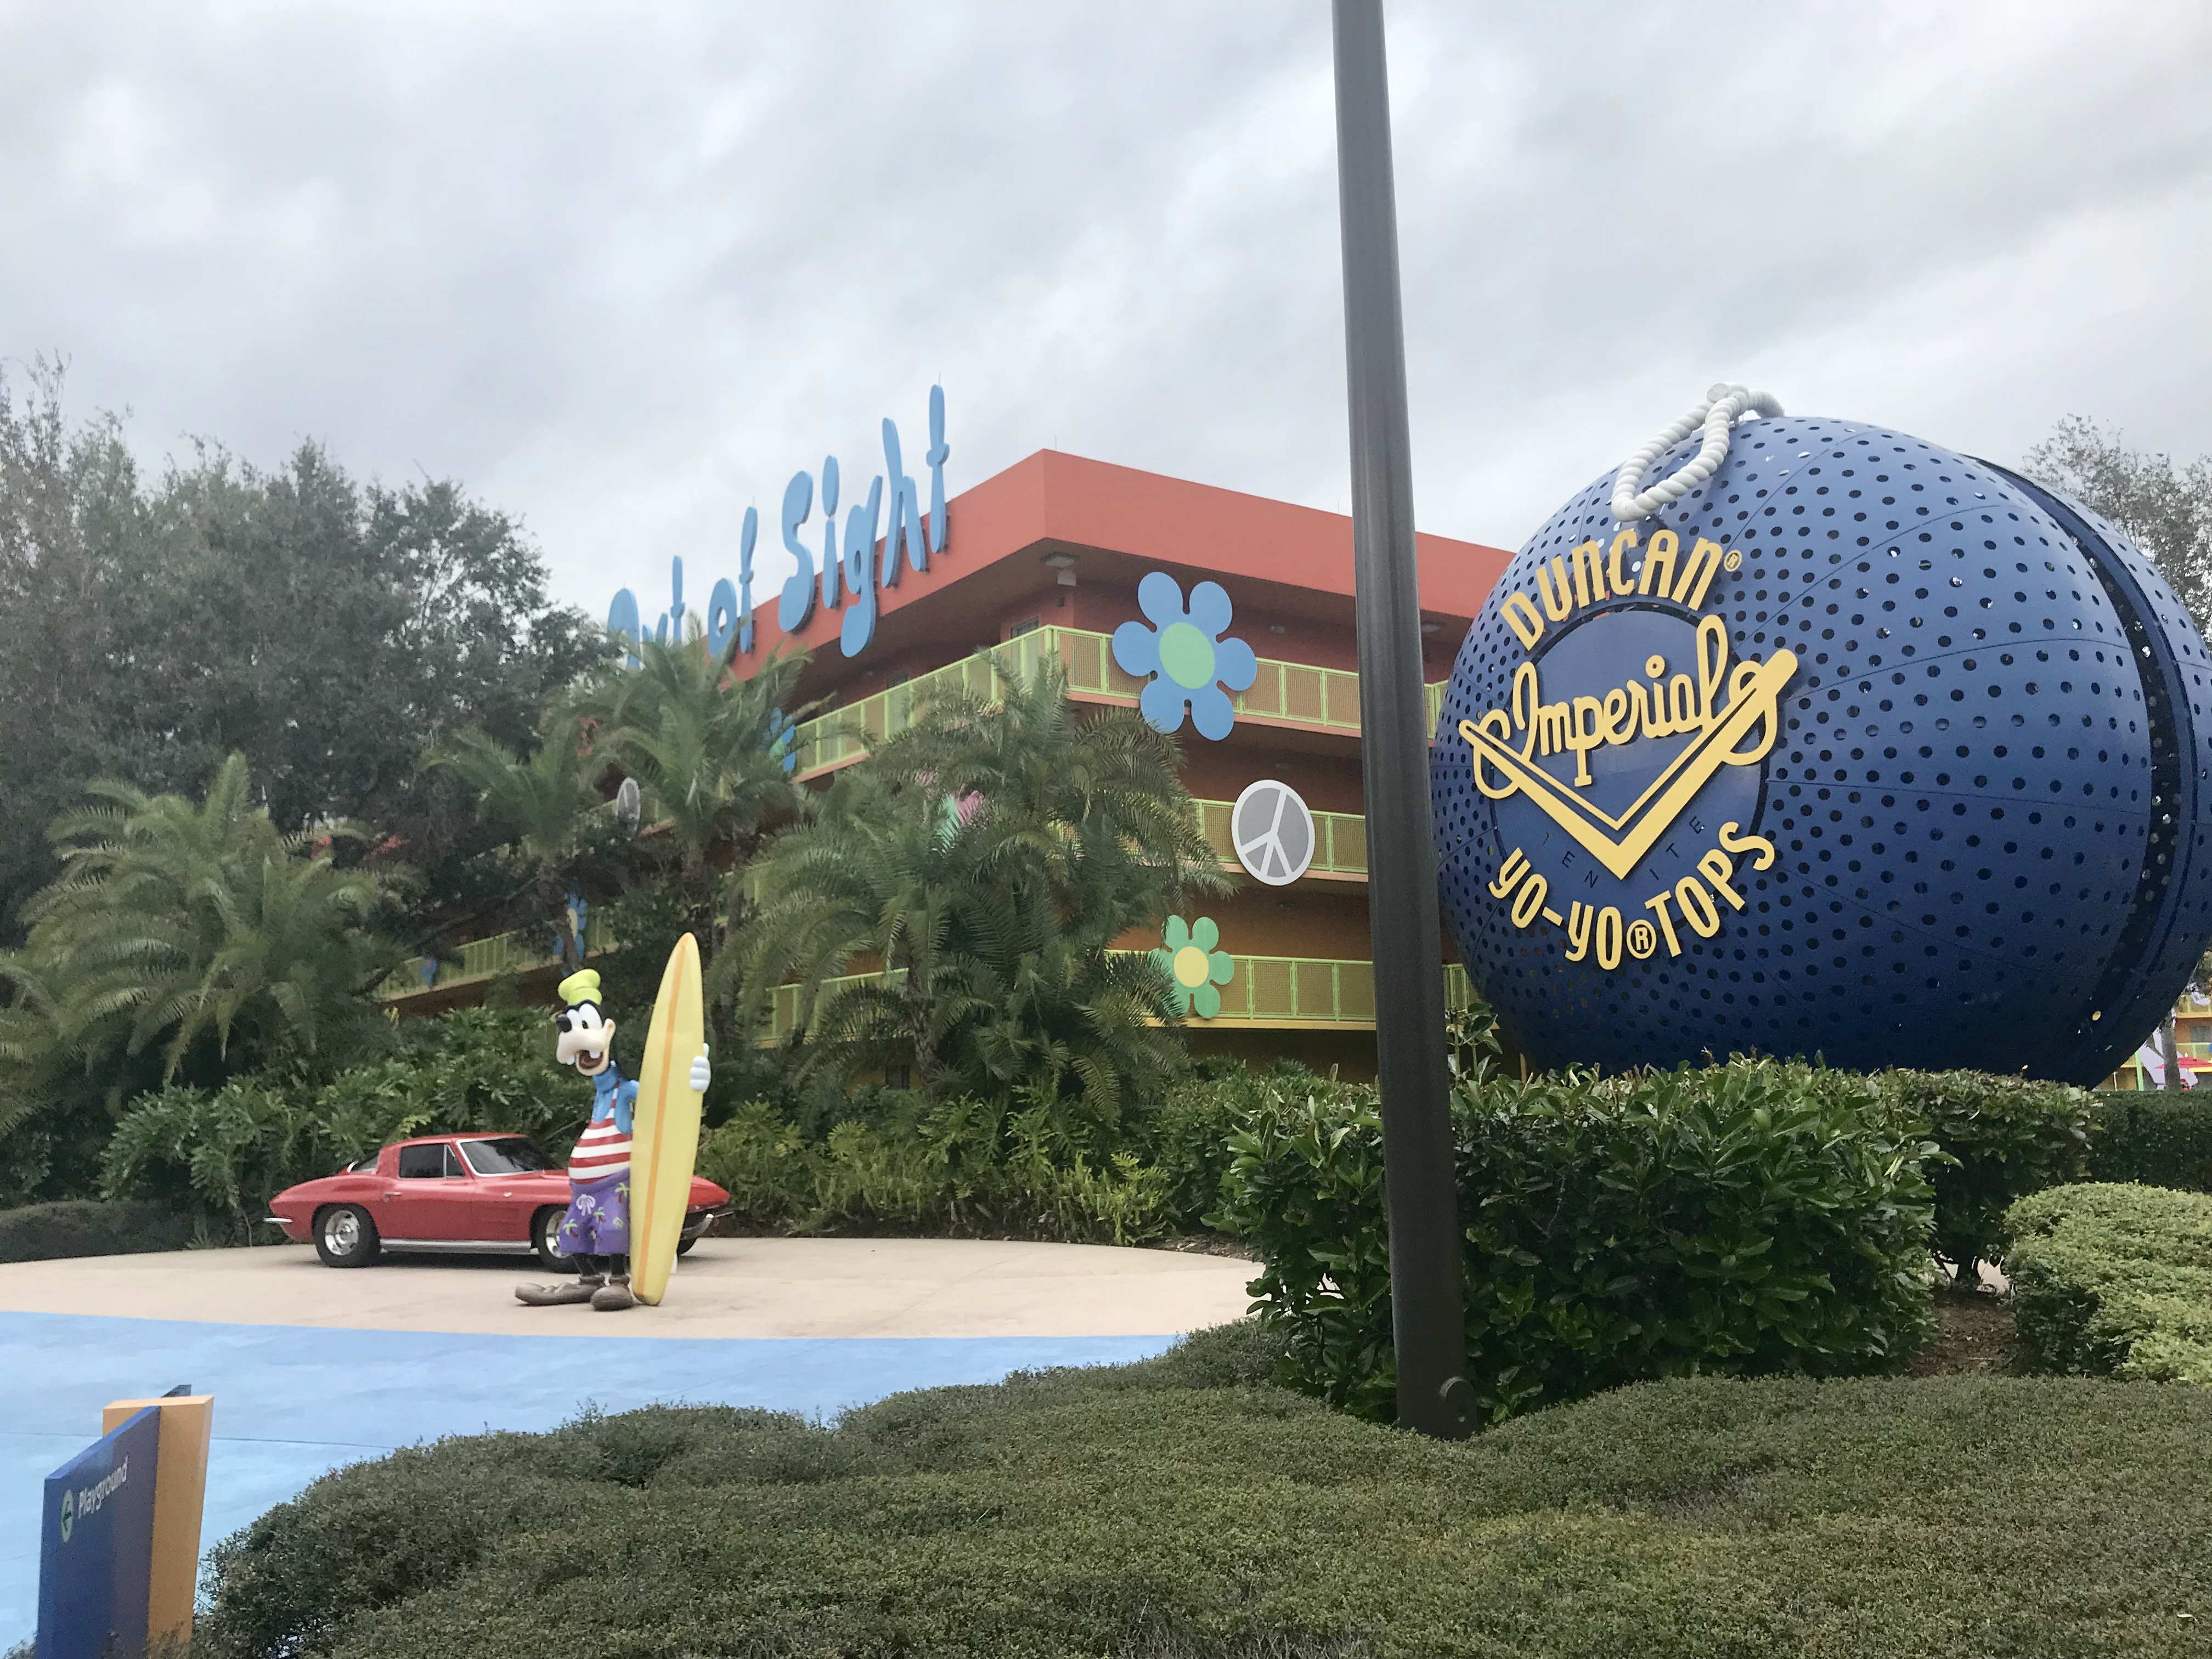 Where To Stay for a runDisney Race – Pop Century